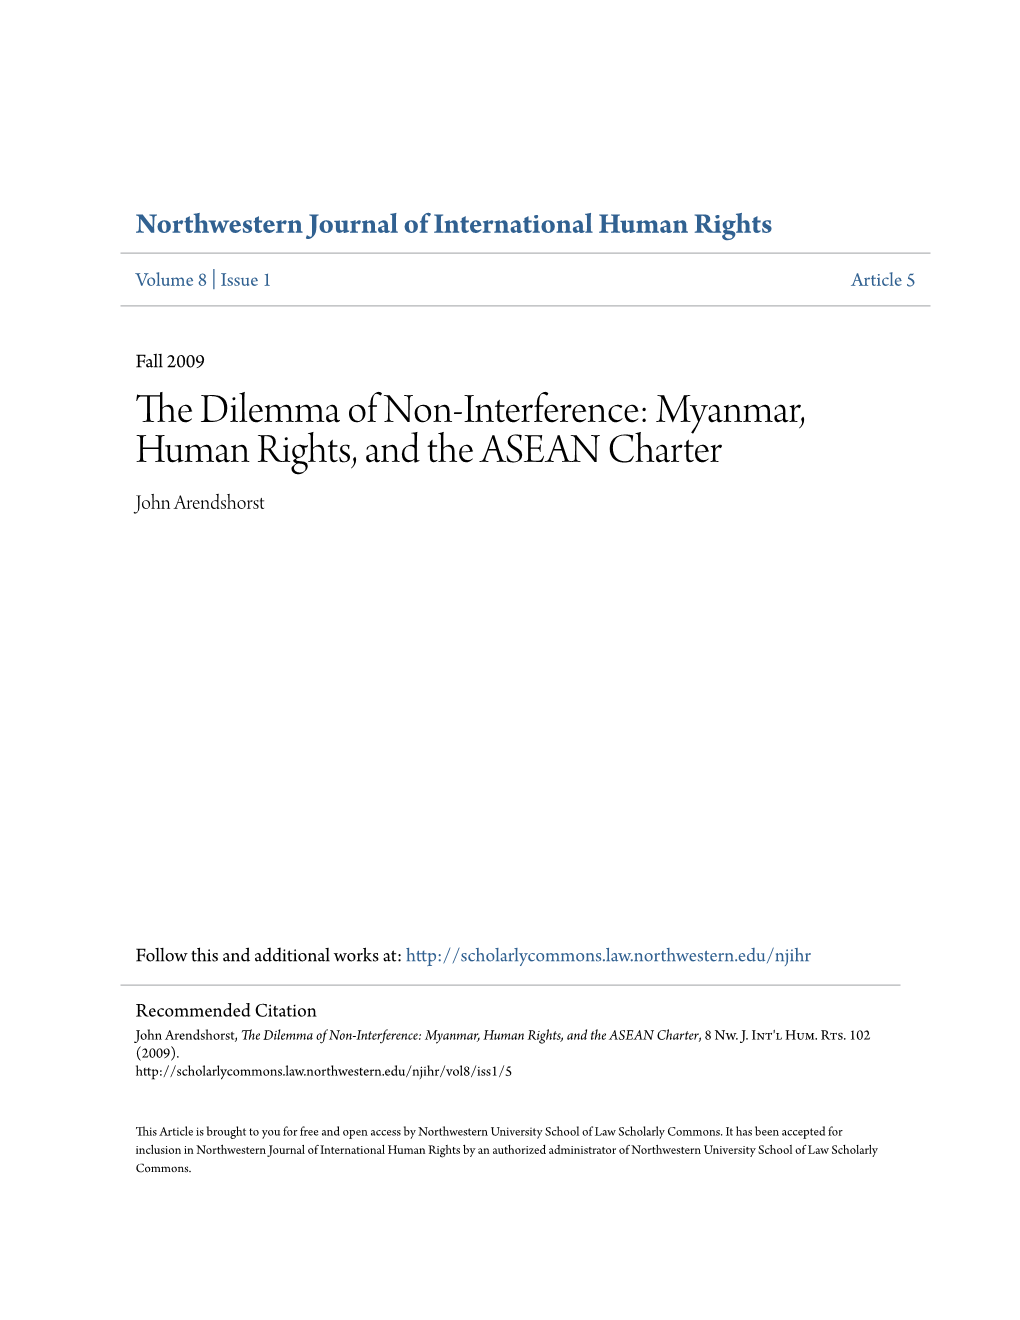 The Dilemma of Non-Interference: Myanmar, Human Rights, and the ASEAN Charter John Arendshorst